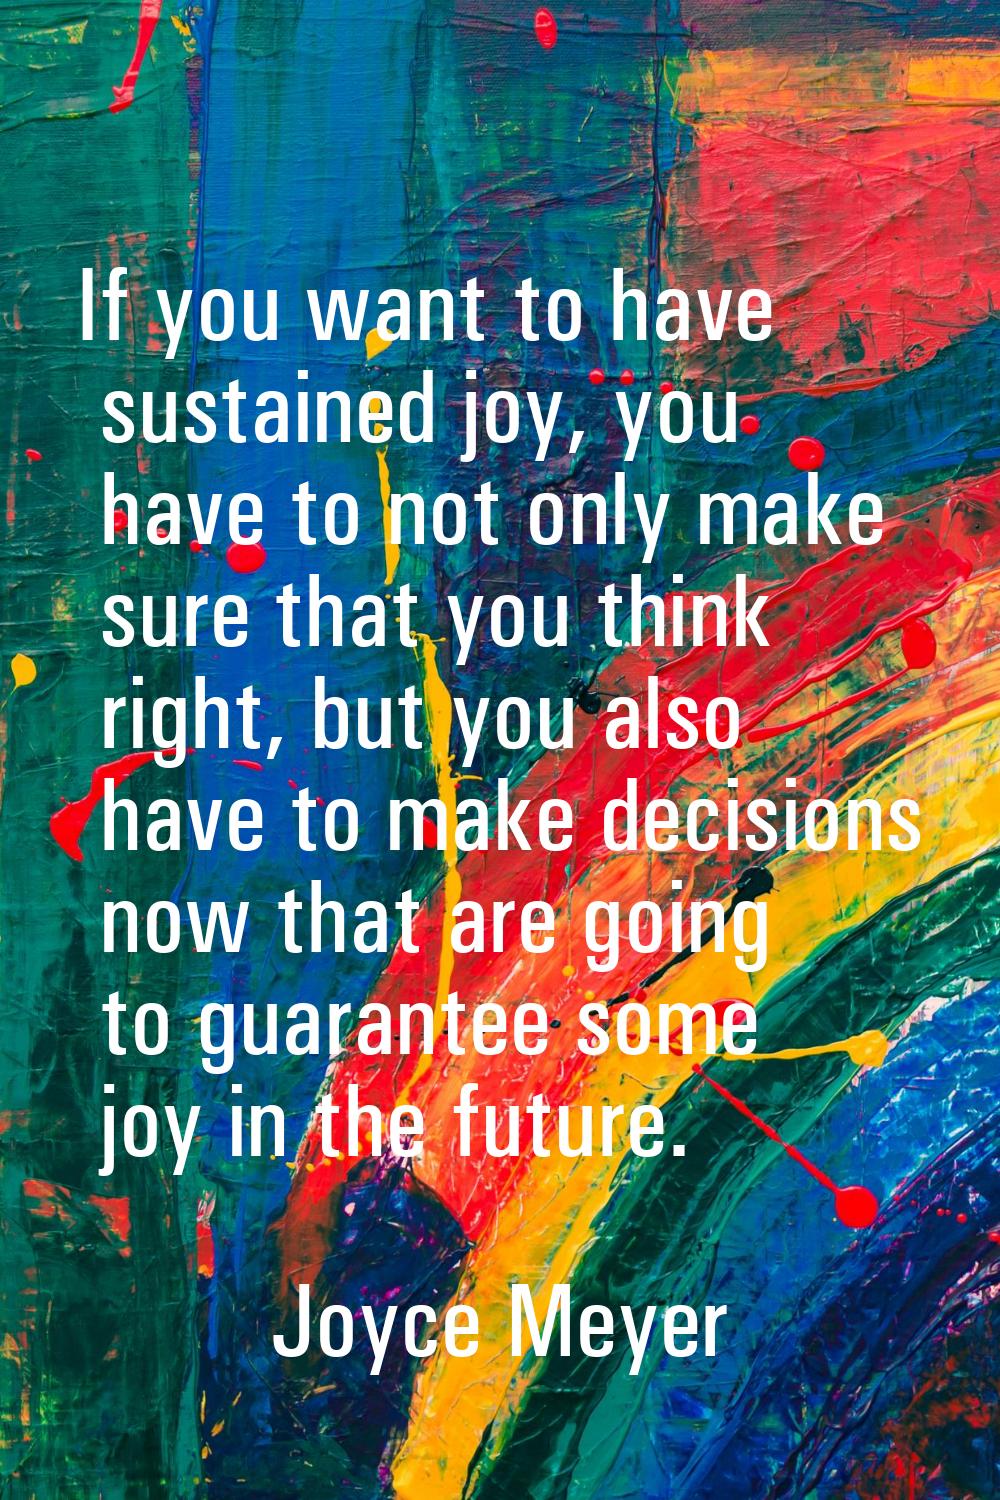 If you want to have sustained joy, you have to not only make sure that you think right, but you als